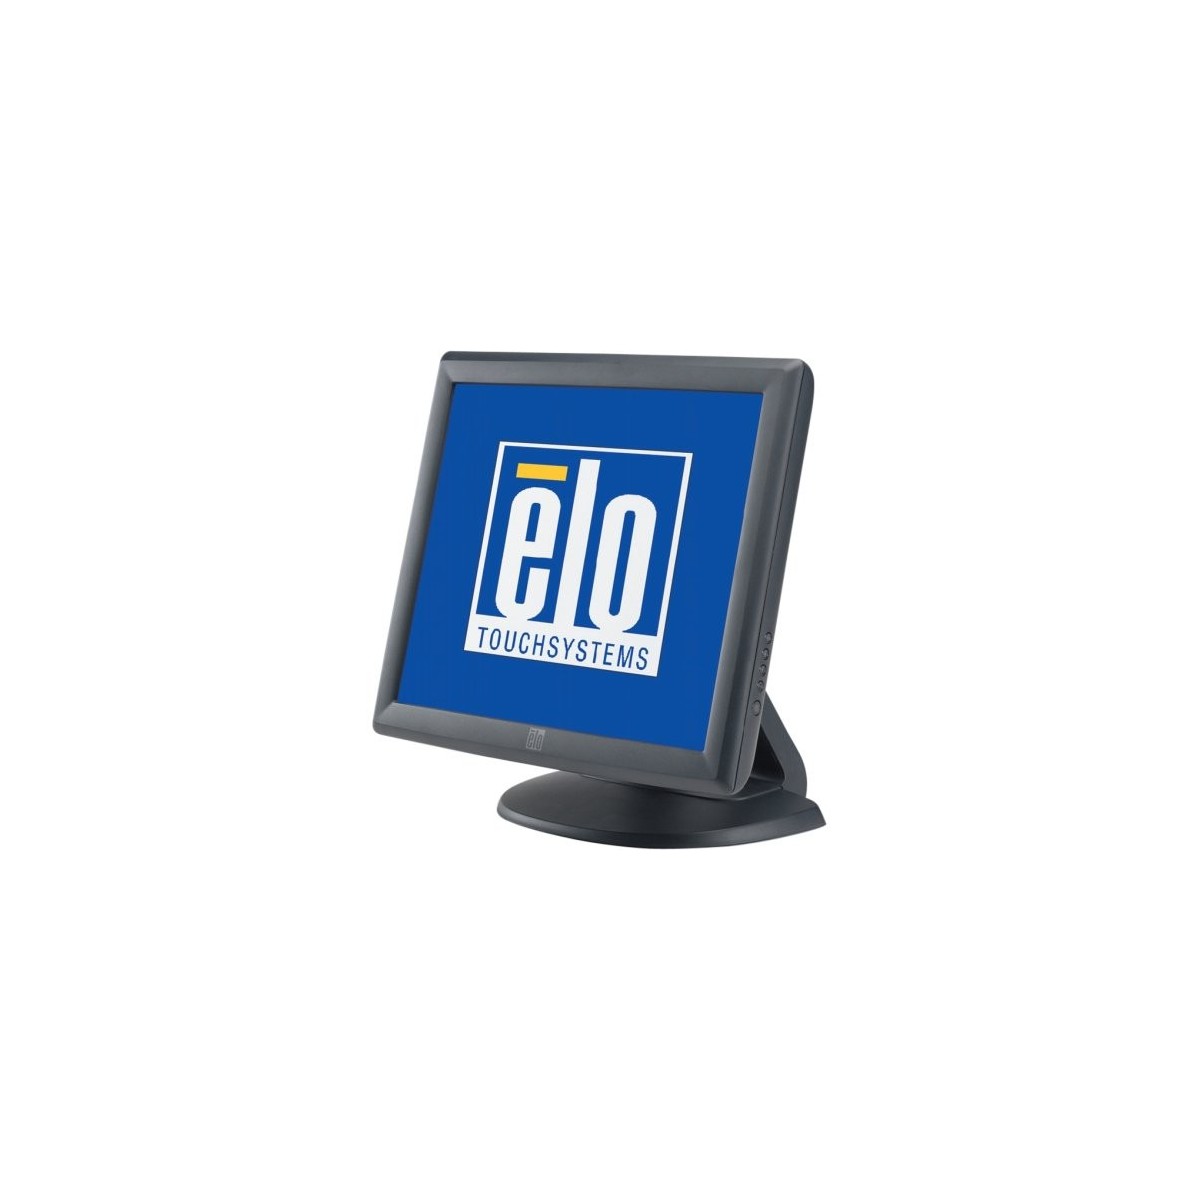 Elo Touch Solutions Elo Touch Solution 1715L - 43.2 cm (17") - 200 cd/m² - LCD/TFT - 1280 x 1024 pixels - LCD - 5:4